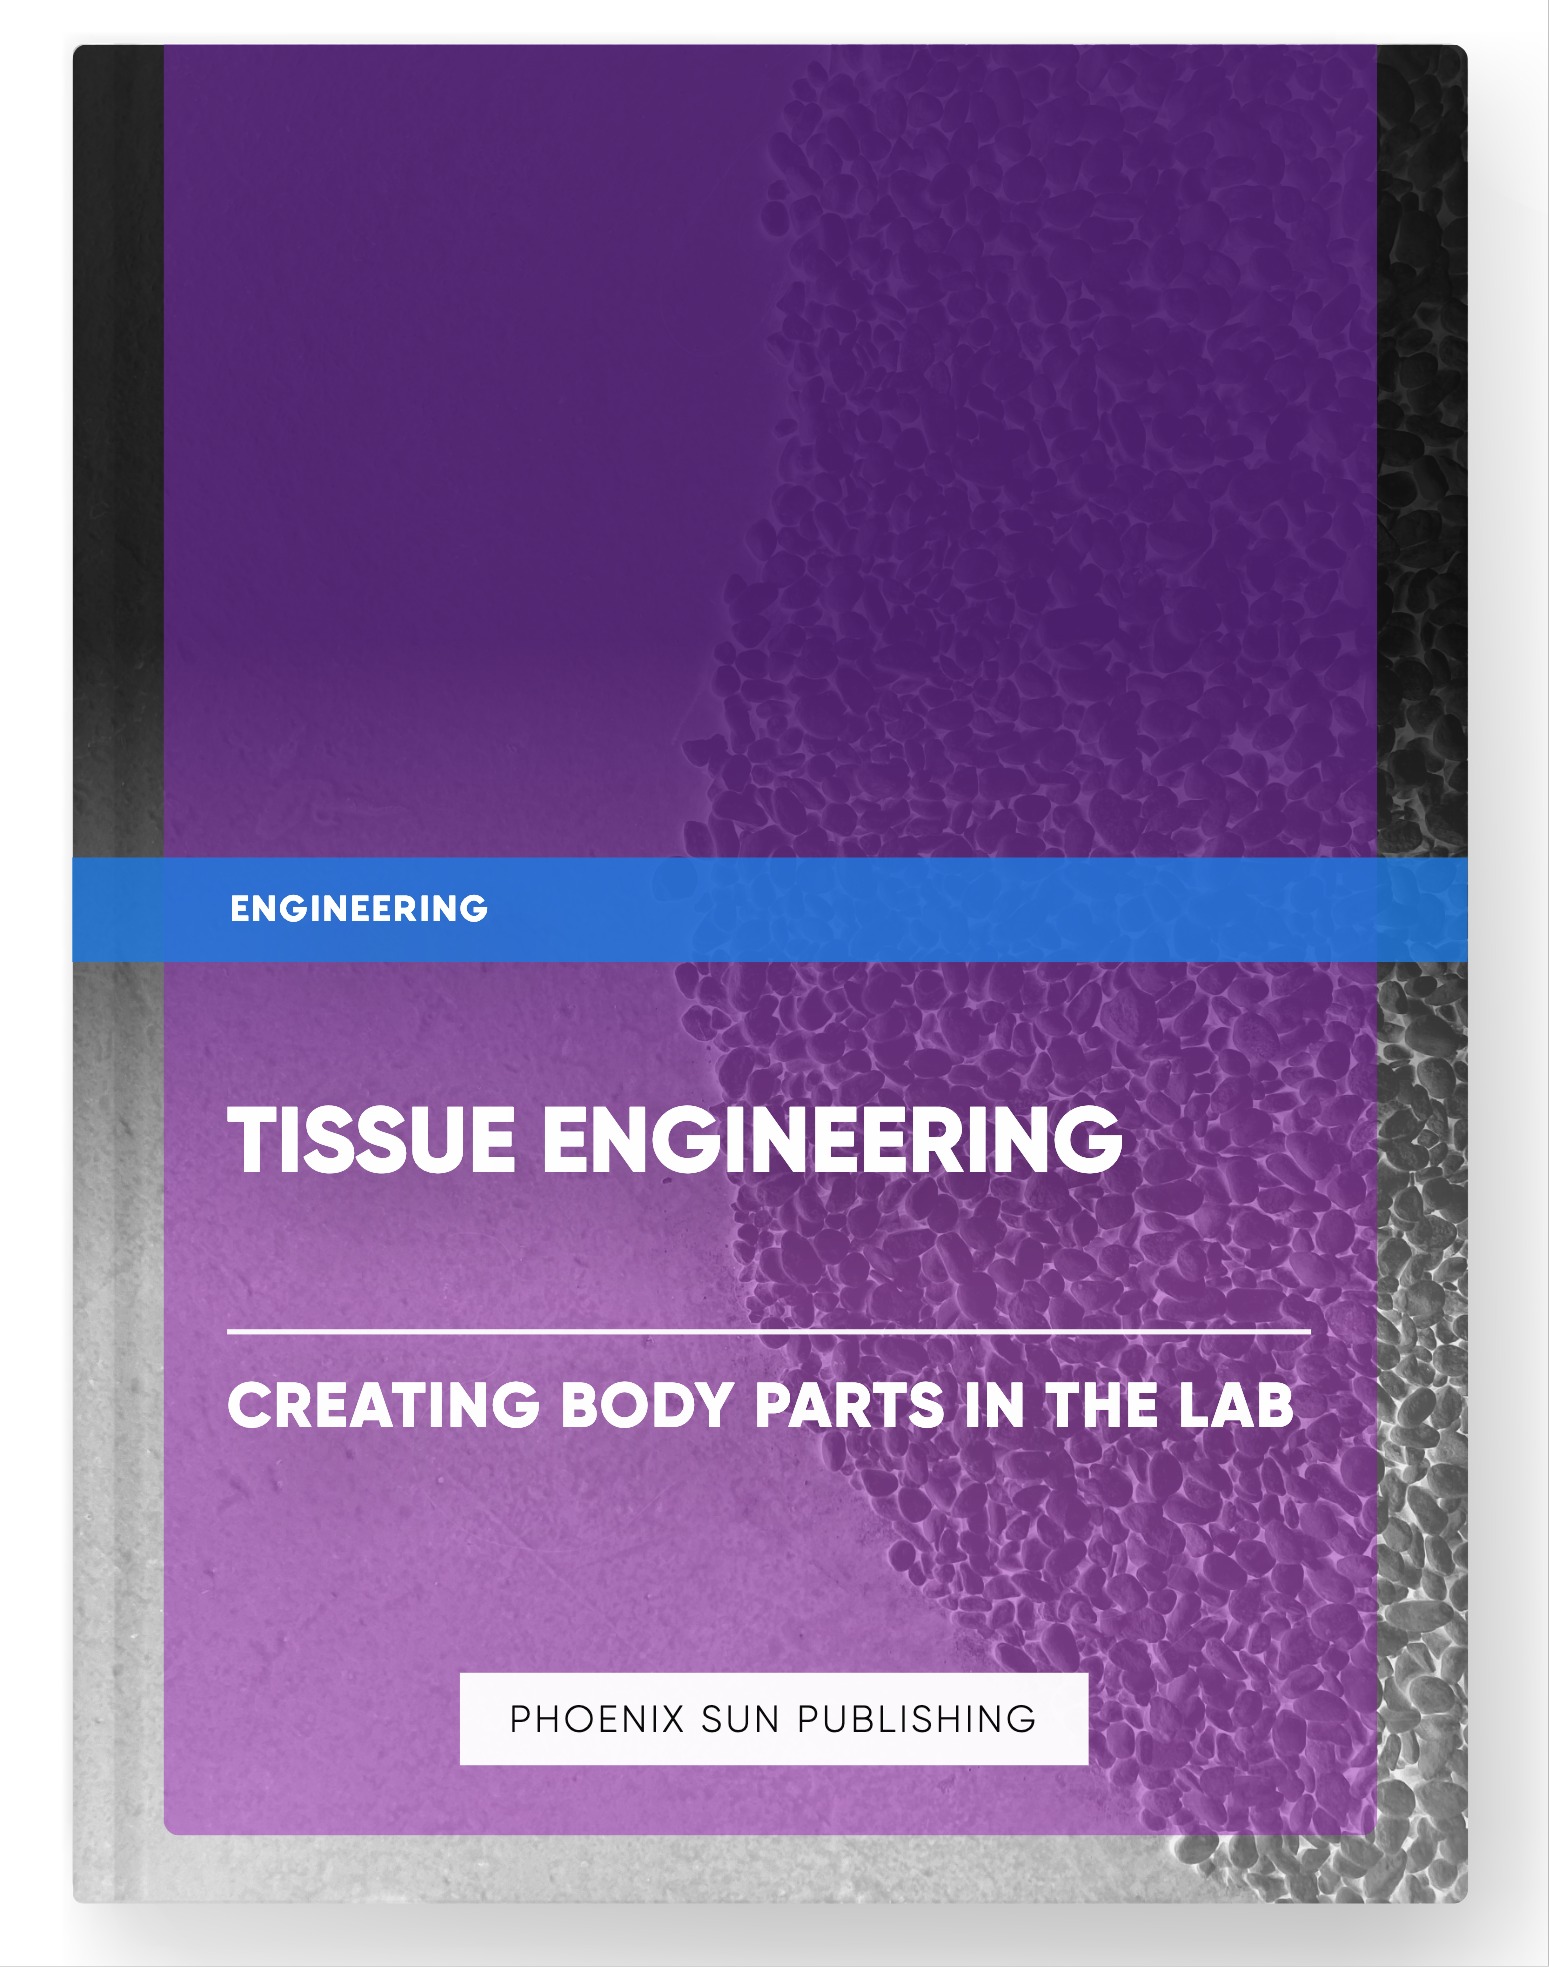 Tissue Engineering – Creating Body Parts in the Lab